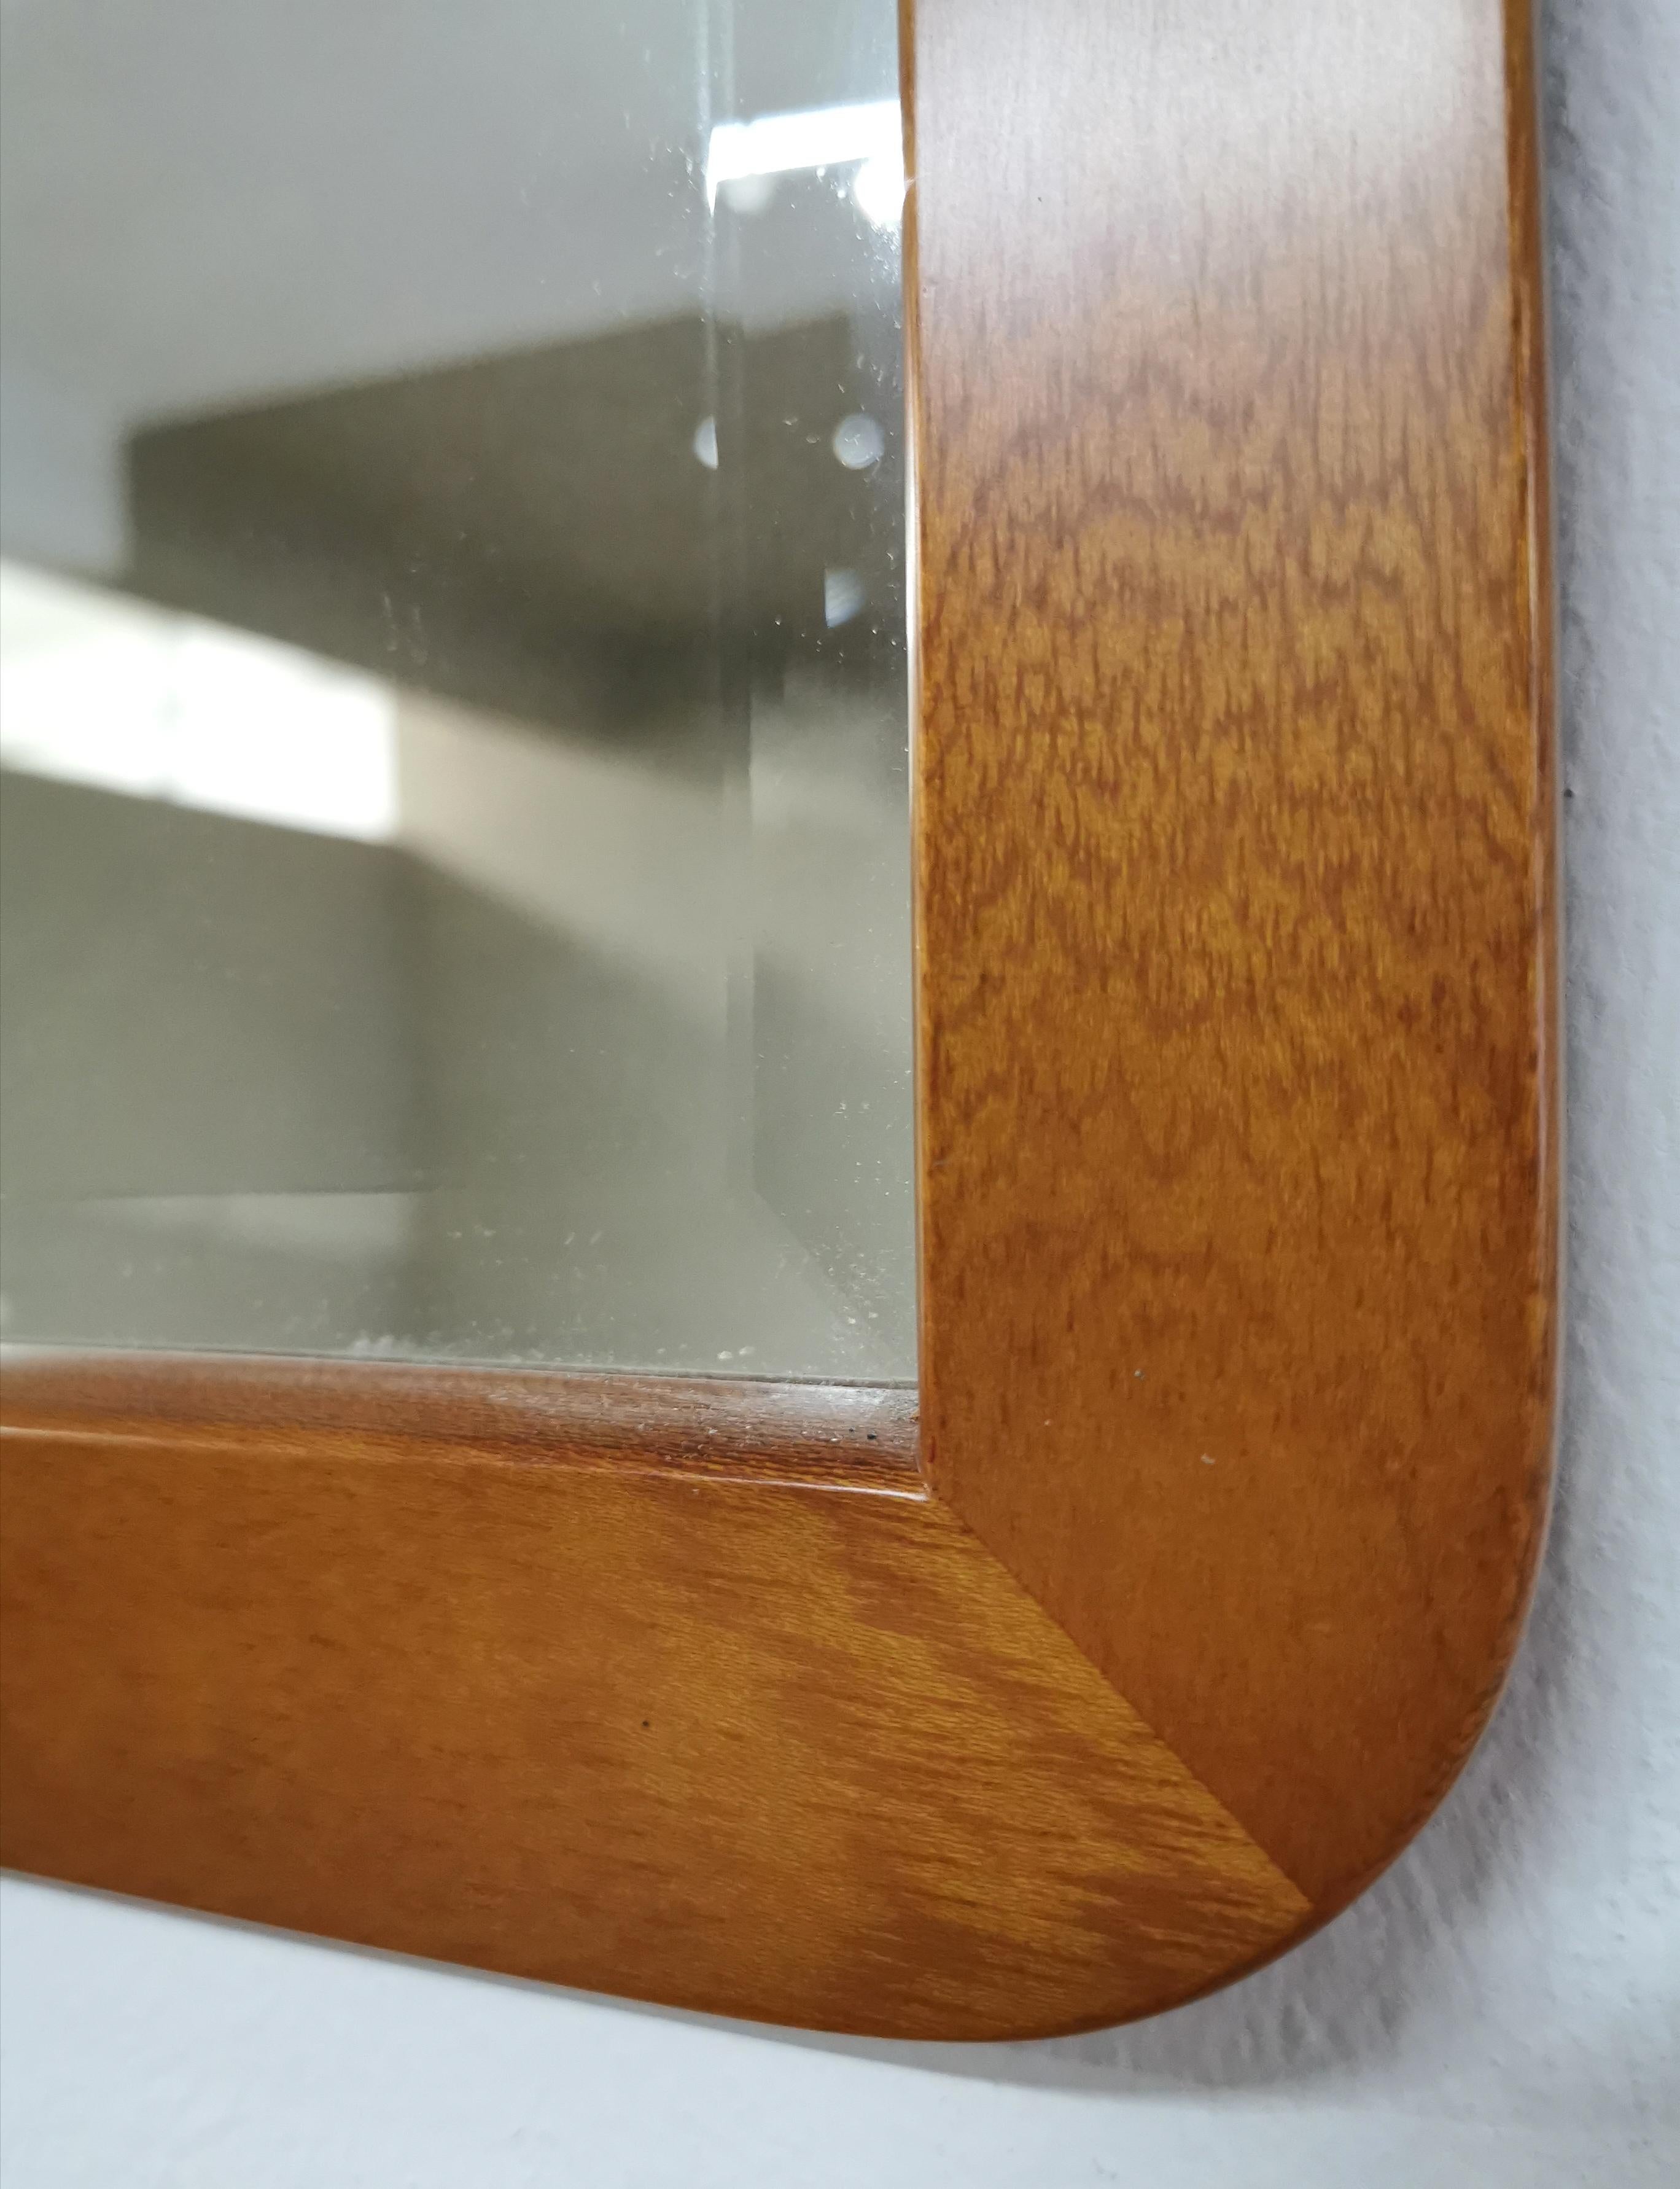 Post-Modern Wall Mirror Cherry Wood Frosted Glass Calligaris Square Modern Italy 1990s For Sale